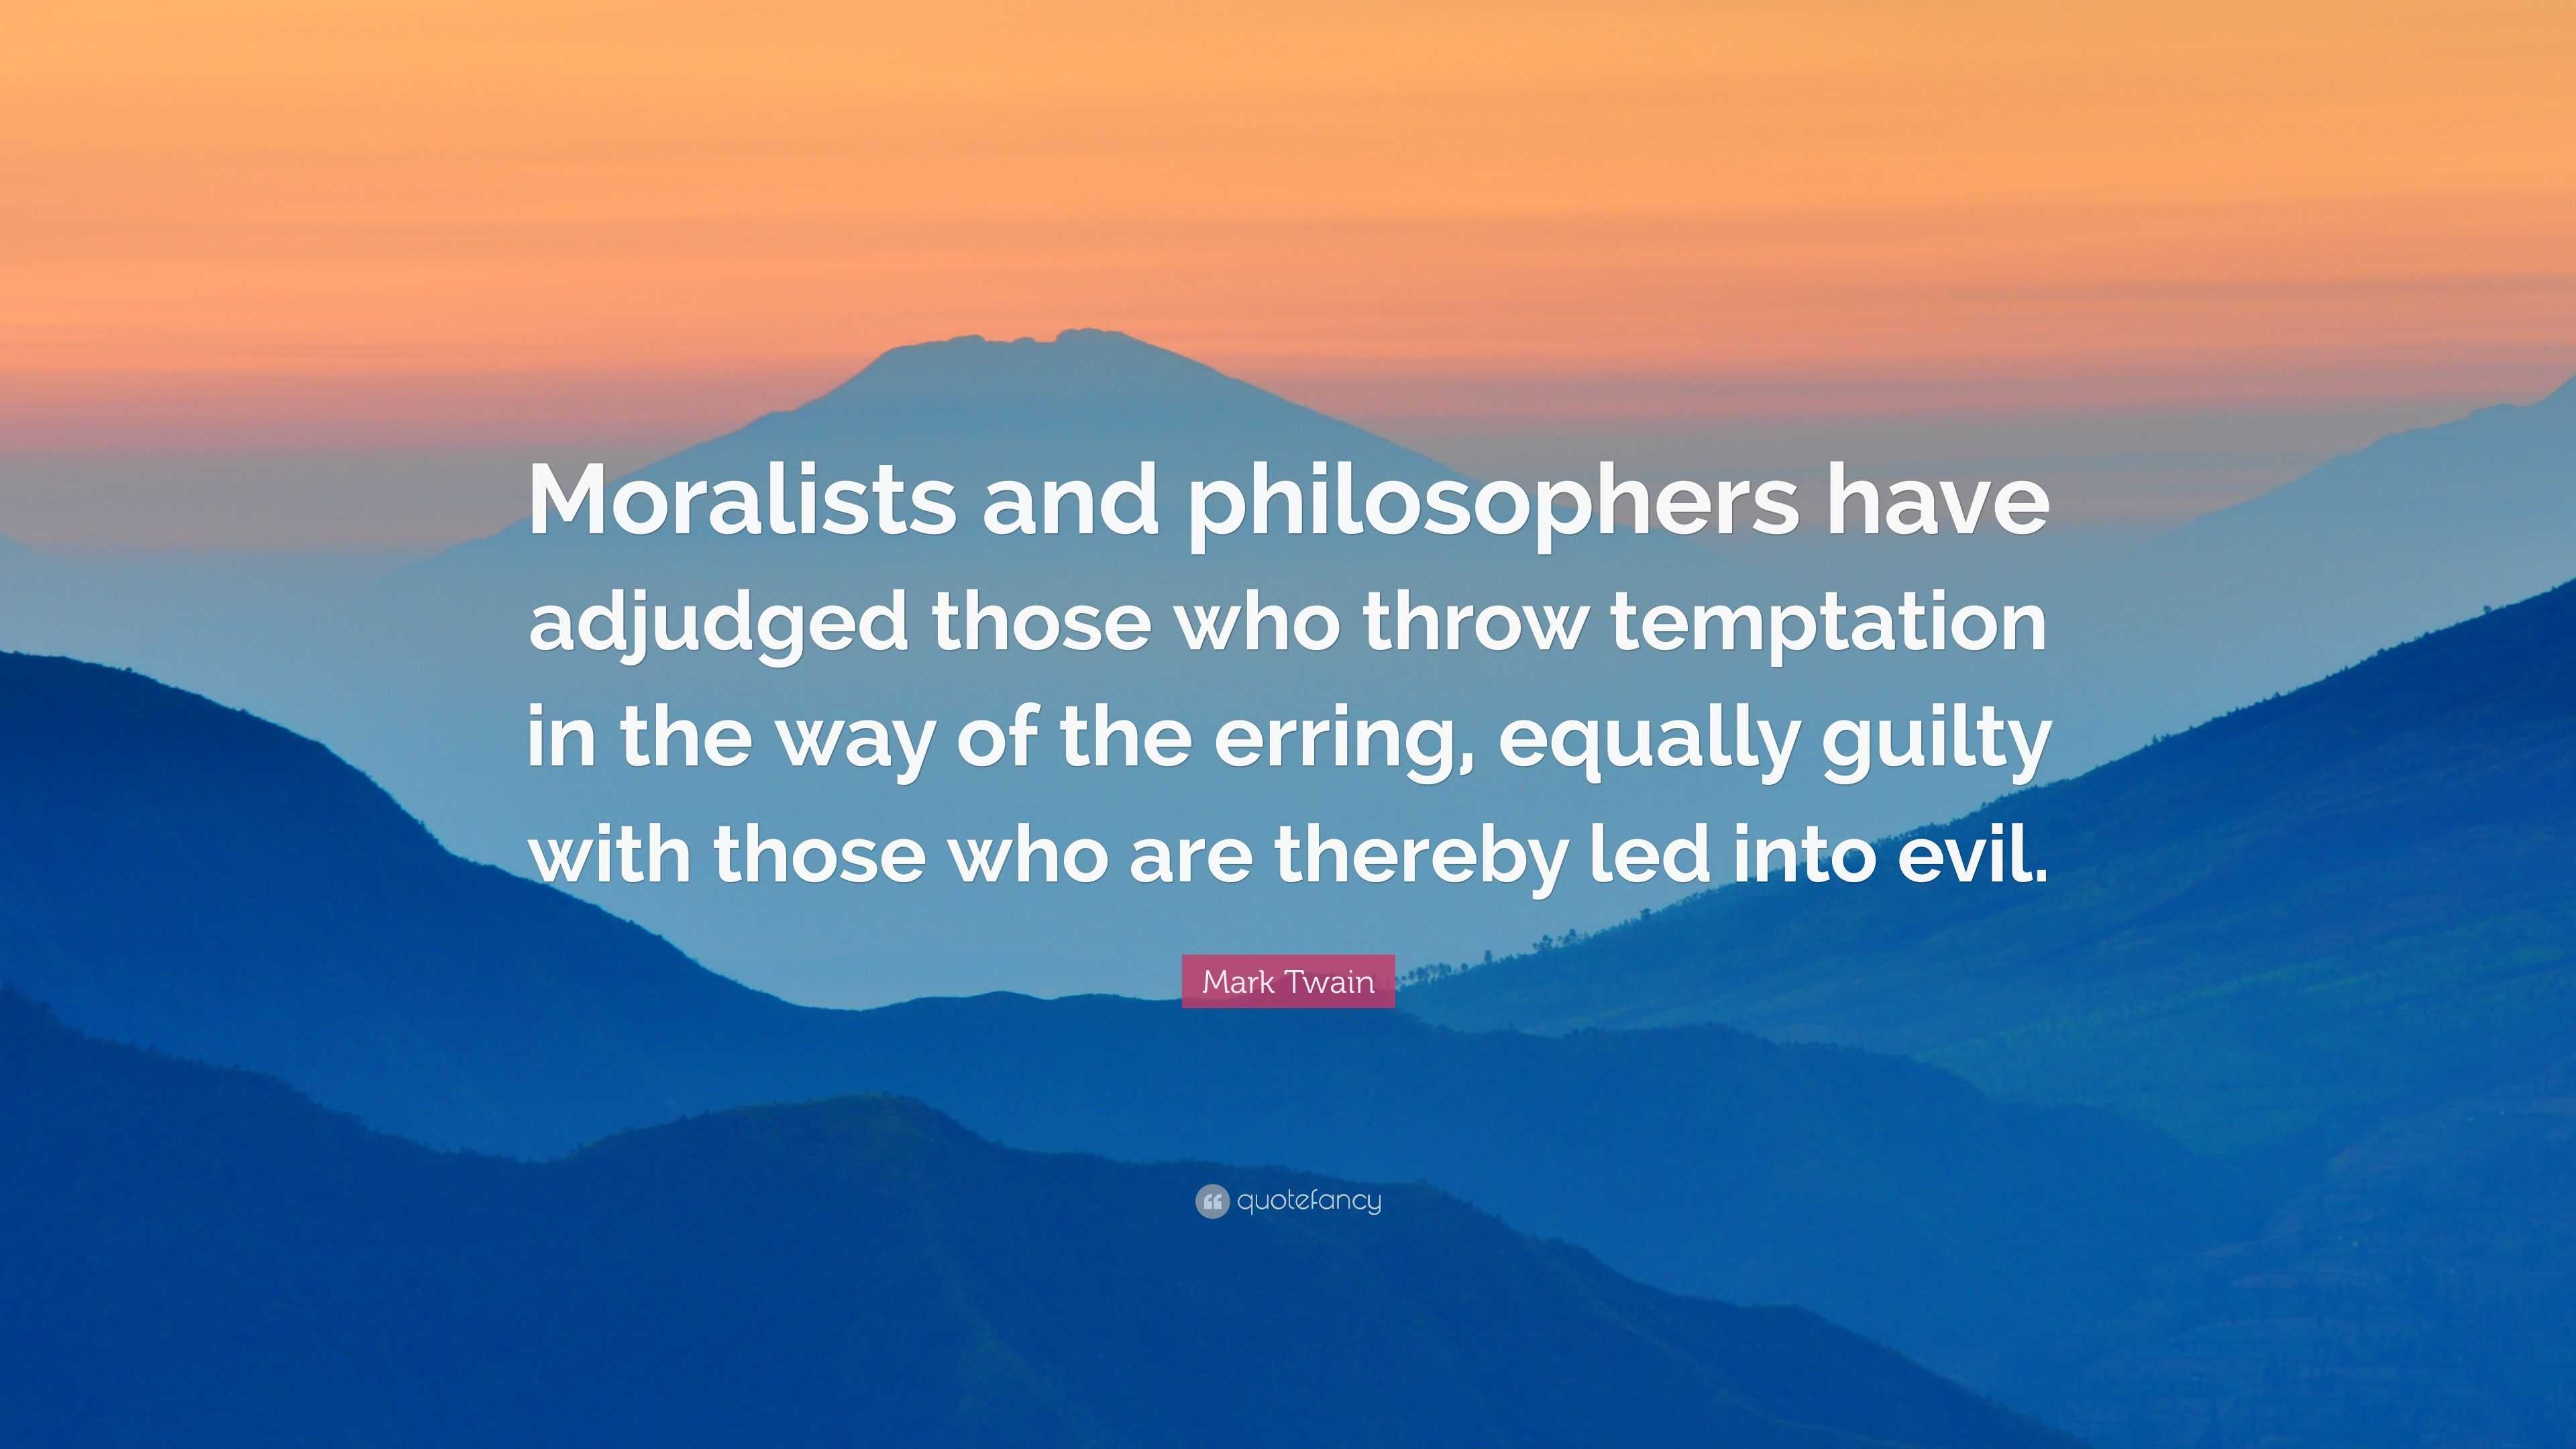 Mark Twain Quote: “Moralists and philosophers have adjudged those who ...